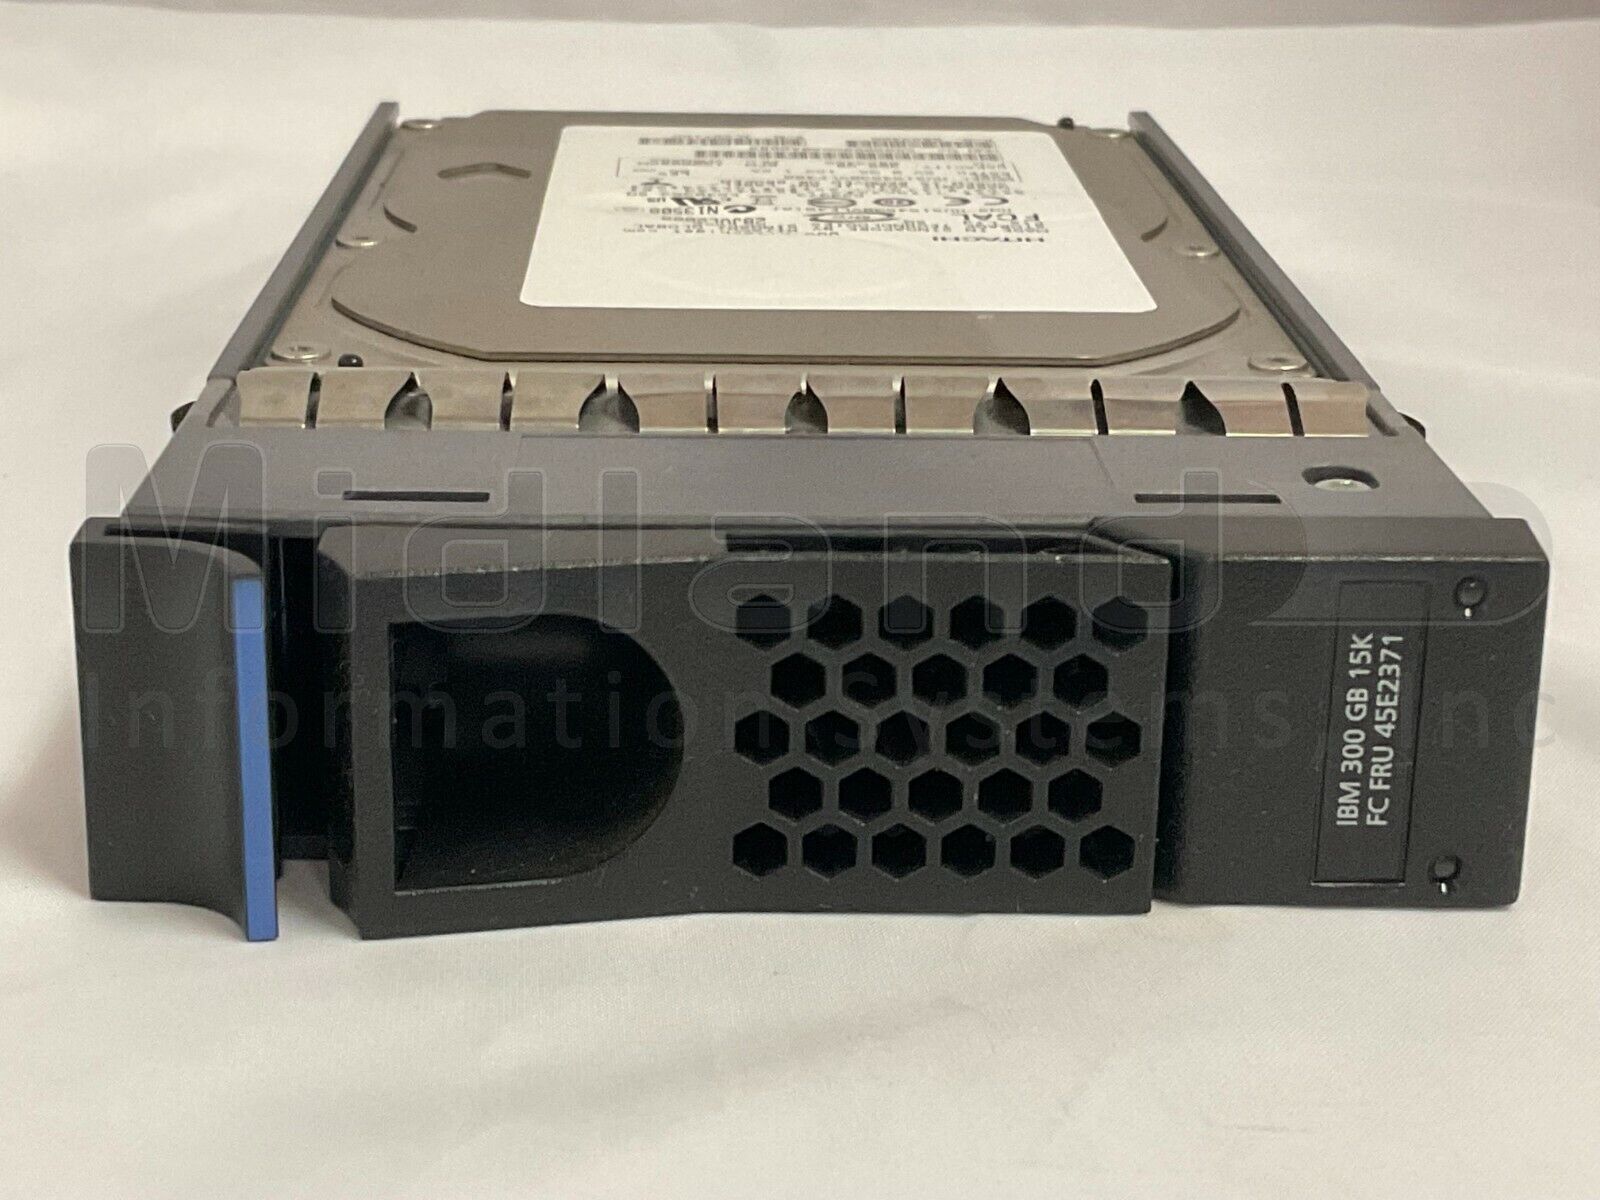 2863-4006 IBM 300GB 15K FC DRIVE FOR EXN2000/EXN4000 NSERIES 45E2371